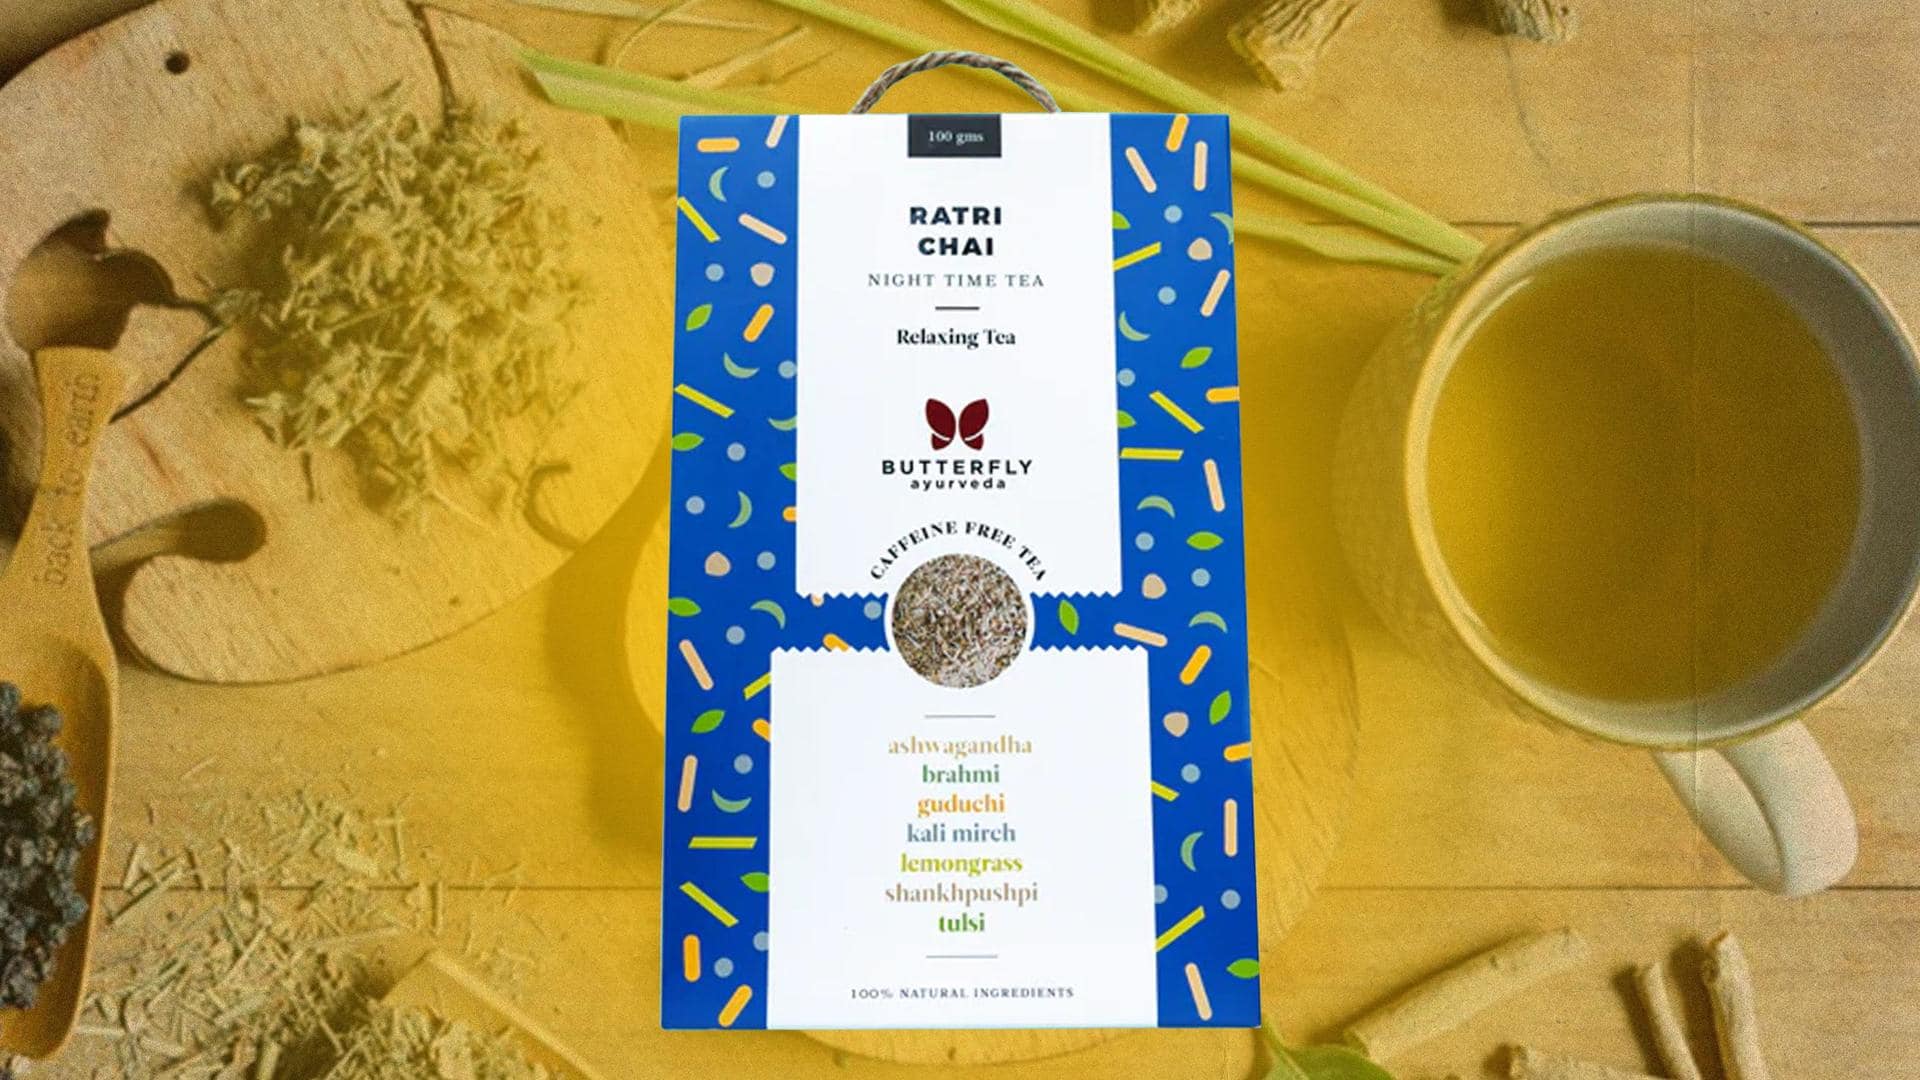 Improve your sleep cycle with this stress-relieving Ratri Chai